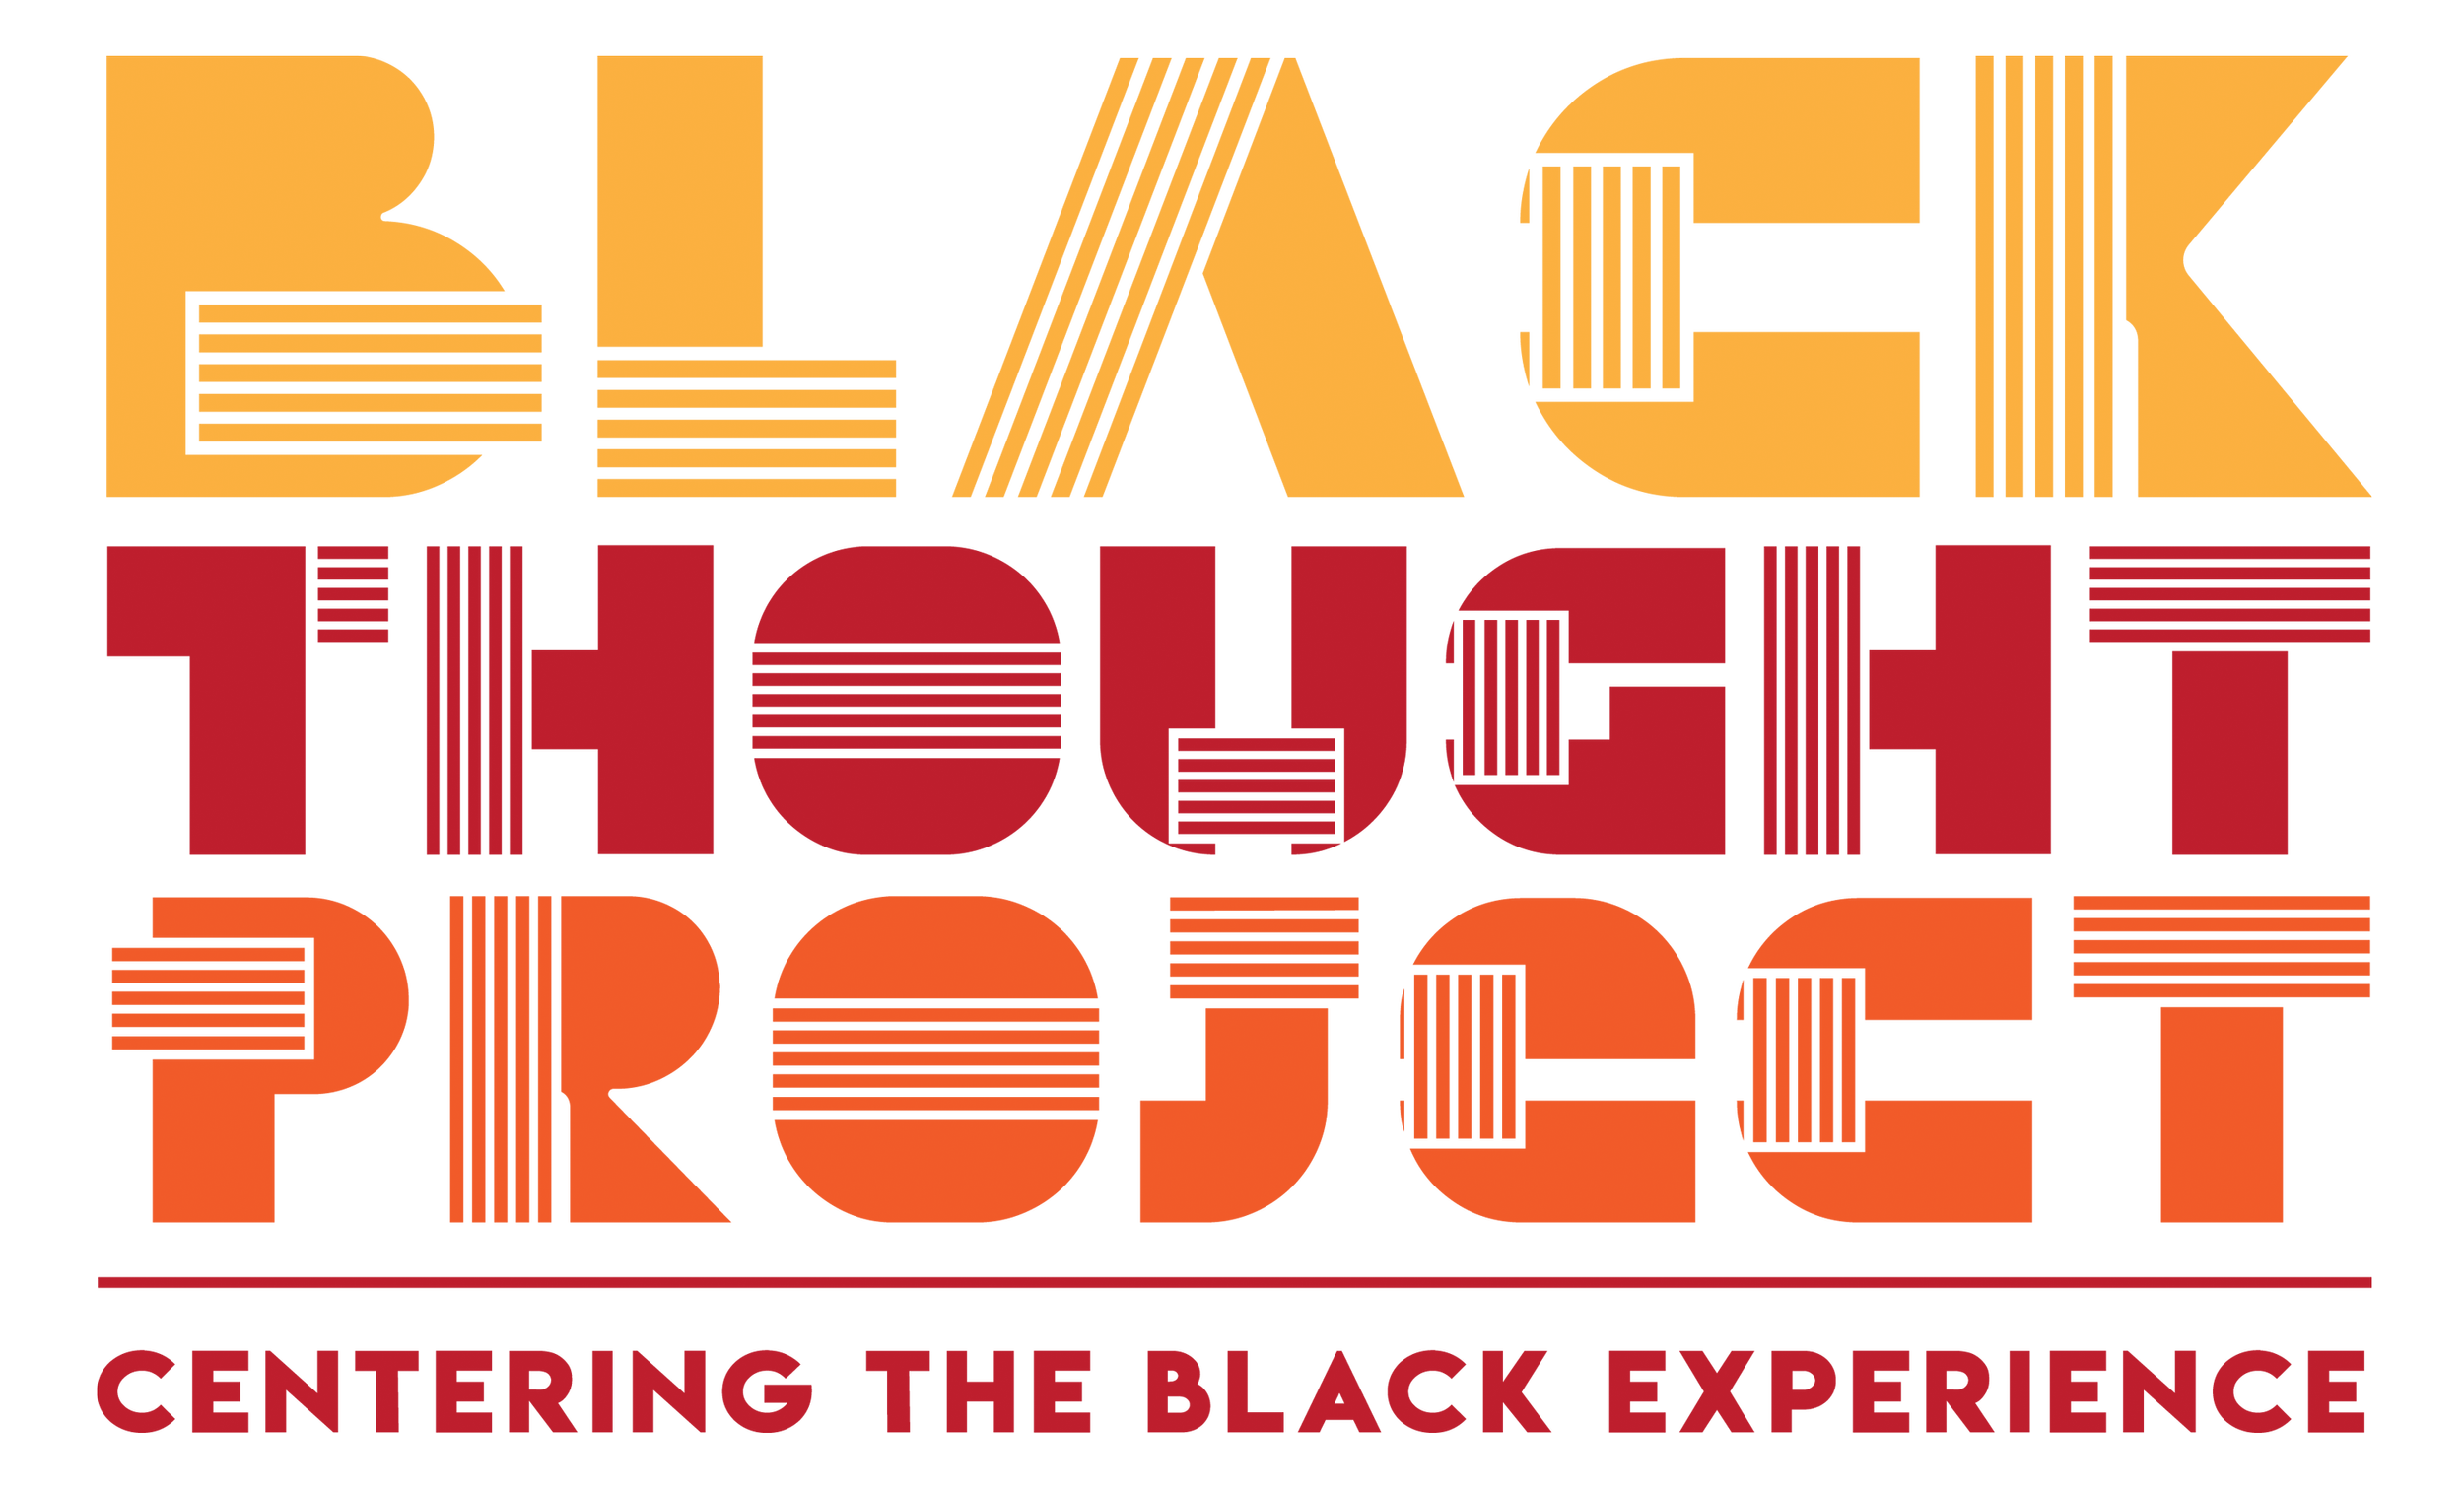 Black Thought Project